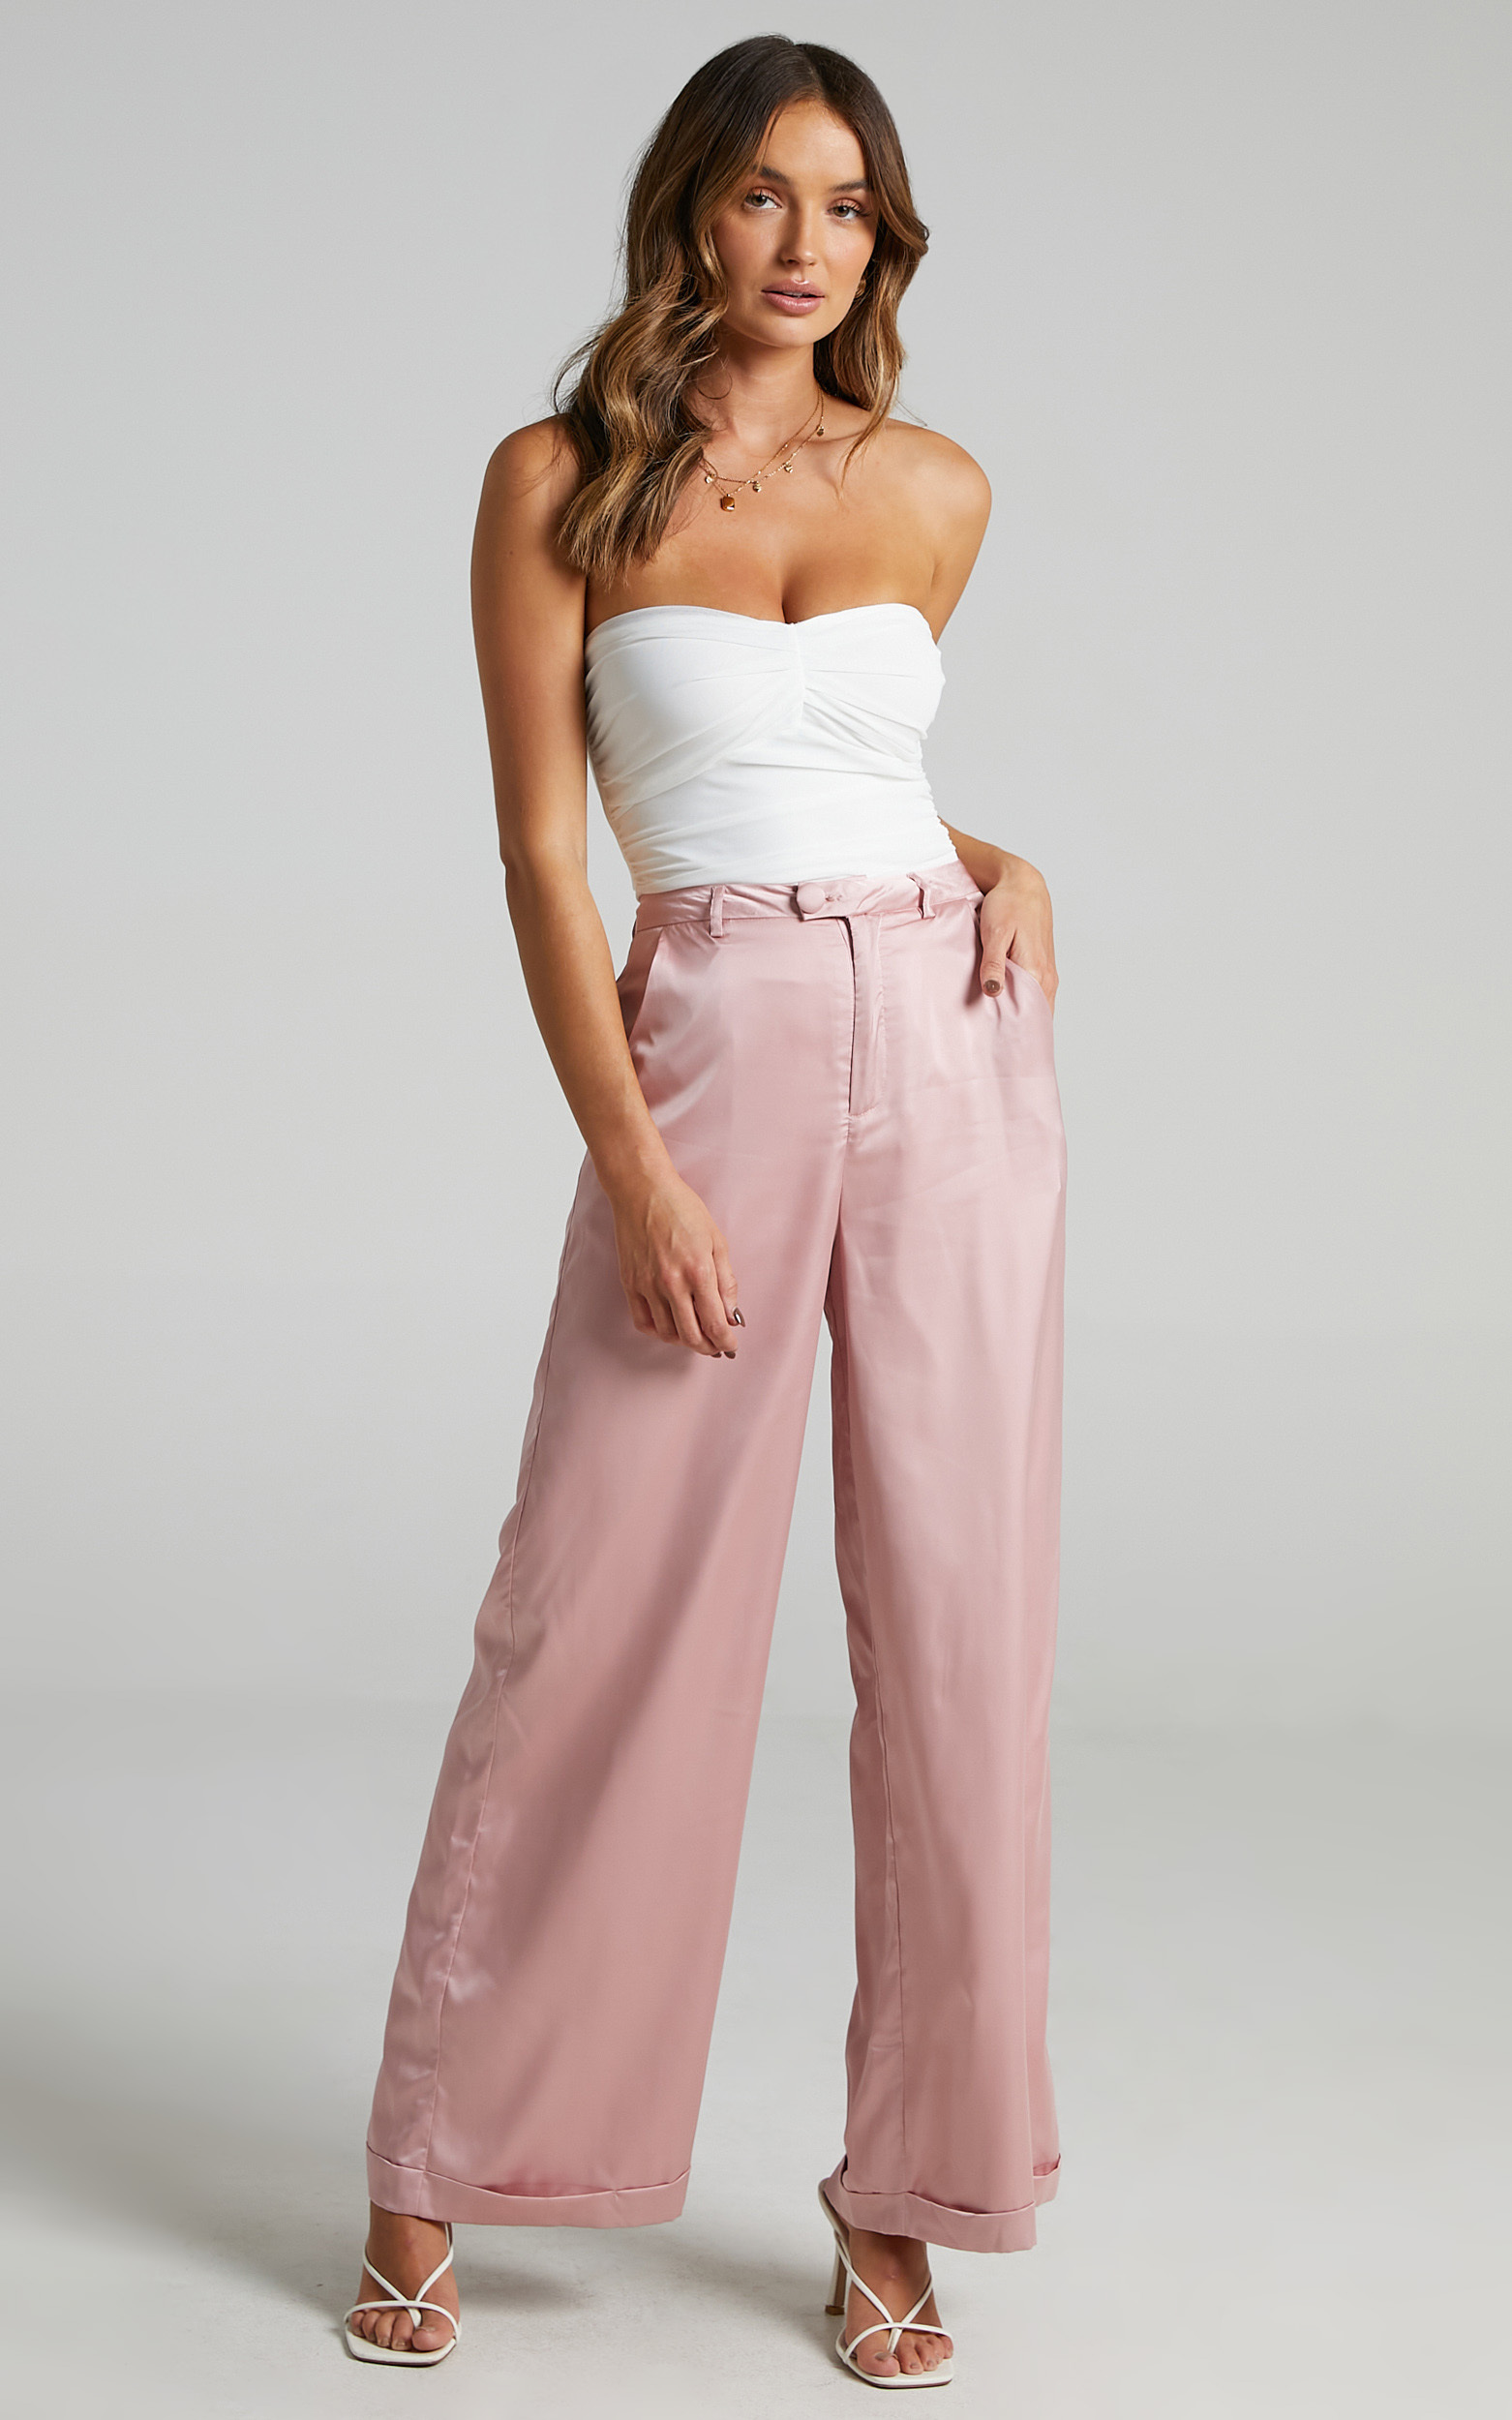 Ailbe Pants in Blush Satin - 06, PNK1, hi-res image number null